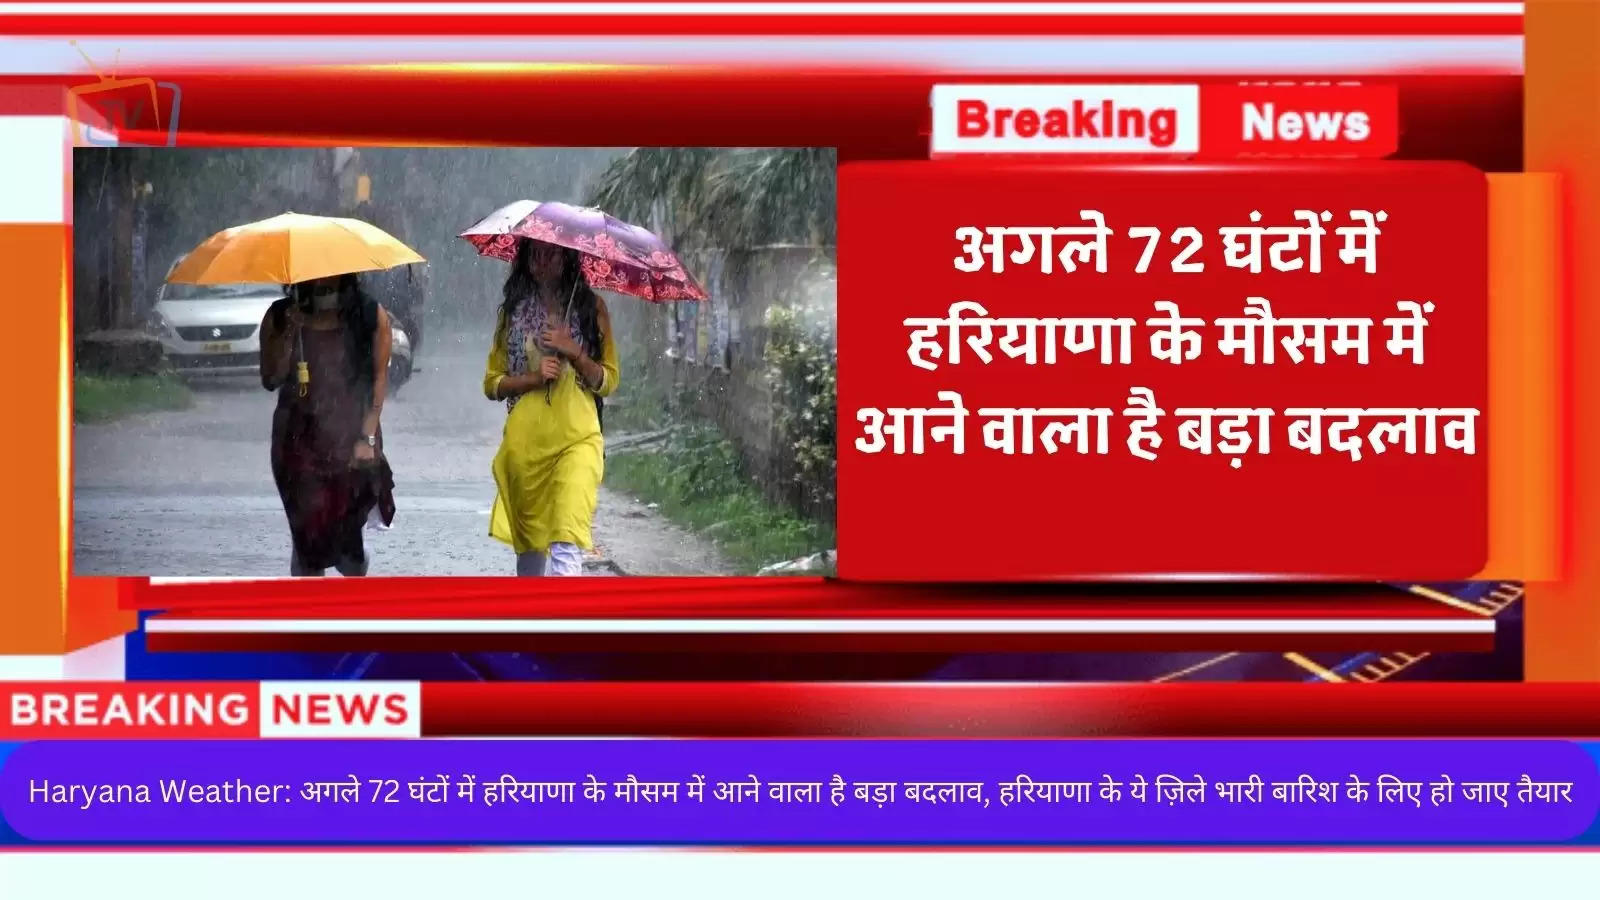 haryana-weather-haryanas-weather-will-take-a-turn-again-from-tomorrow-forecast-of-heavy-rain-for-several-d